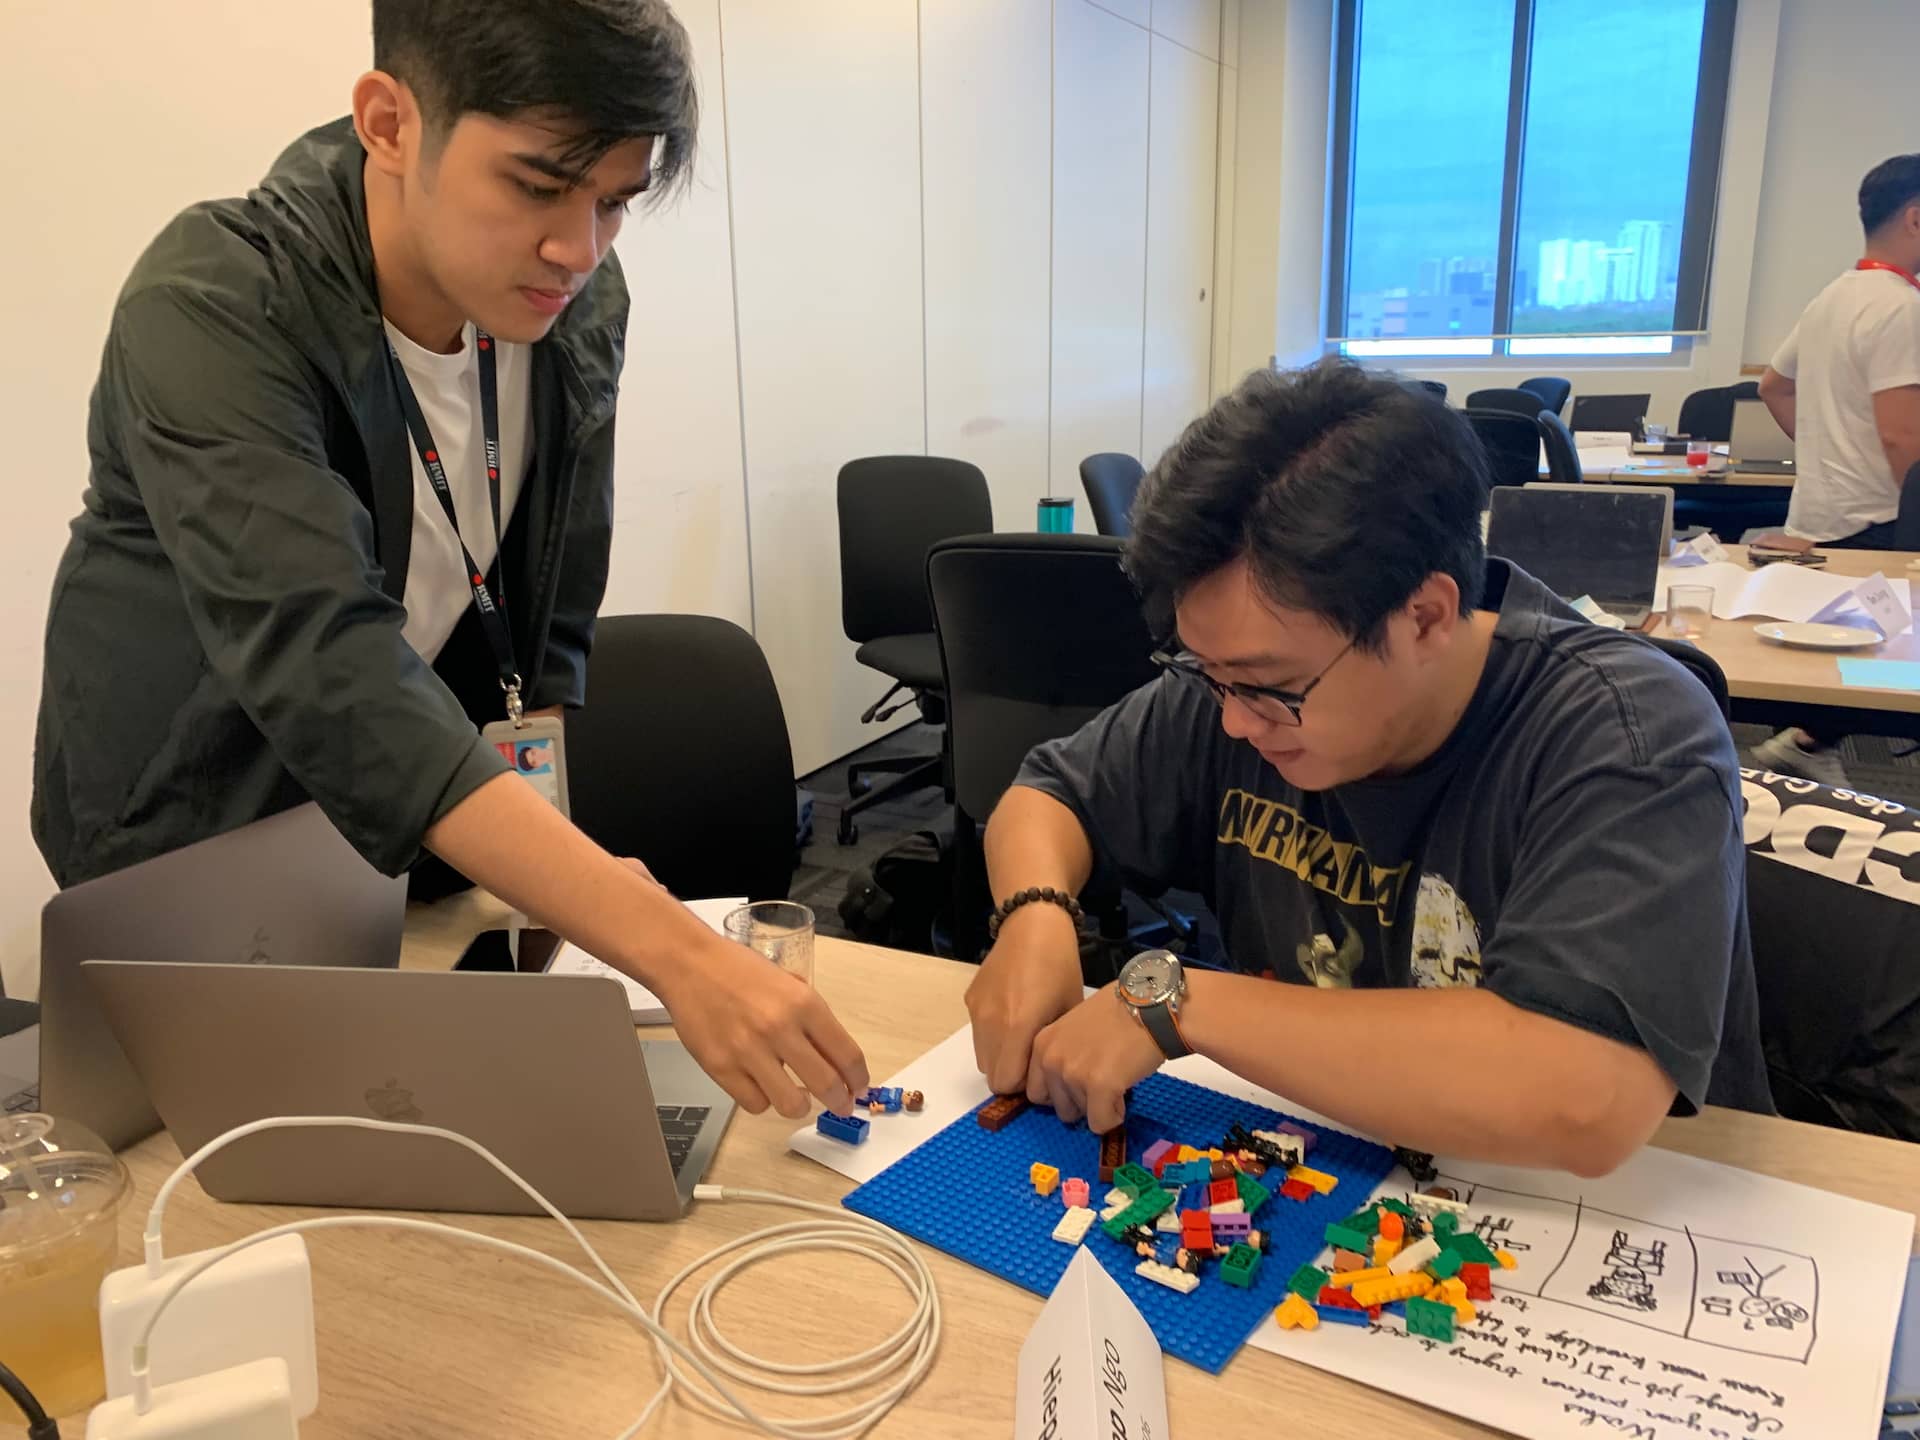 two-male-students-building-lego-in-design-studies-class.jpg